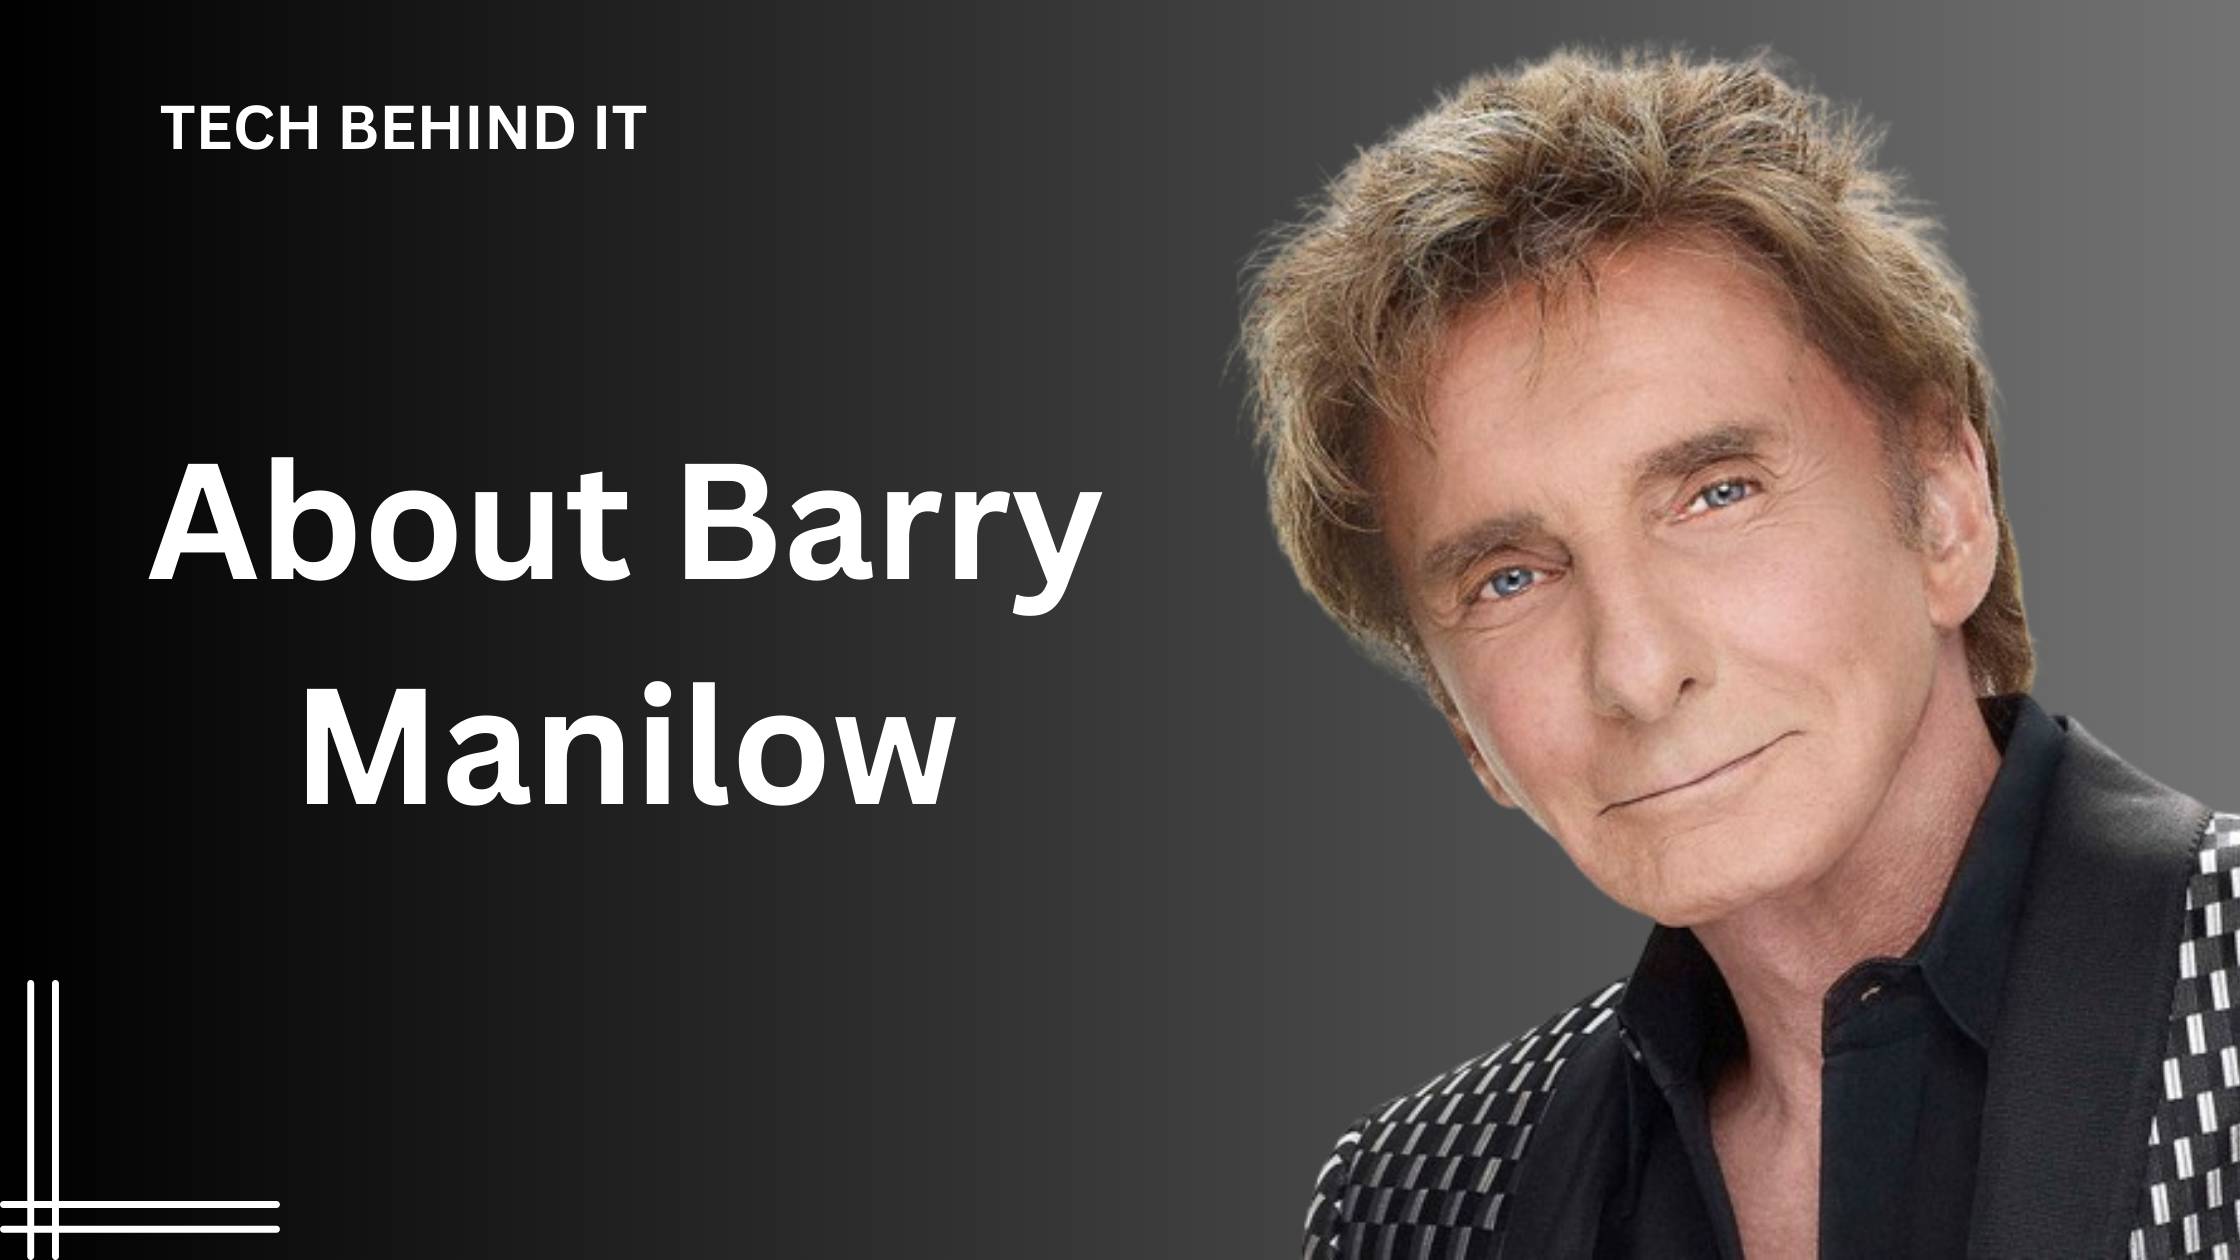 About Barry Manilow